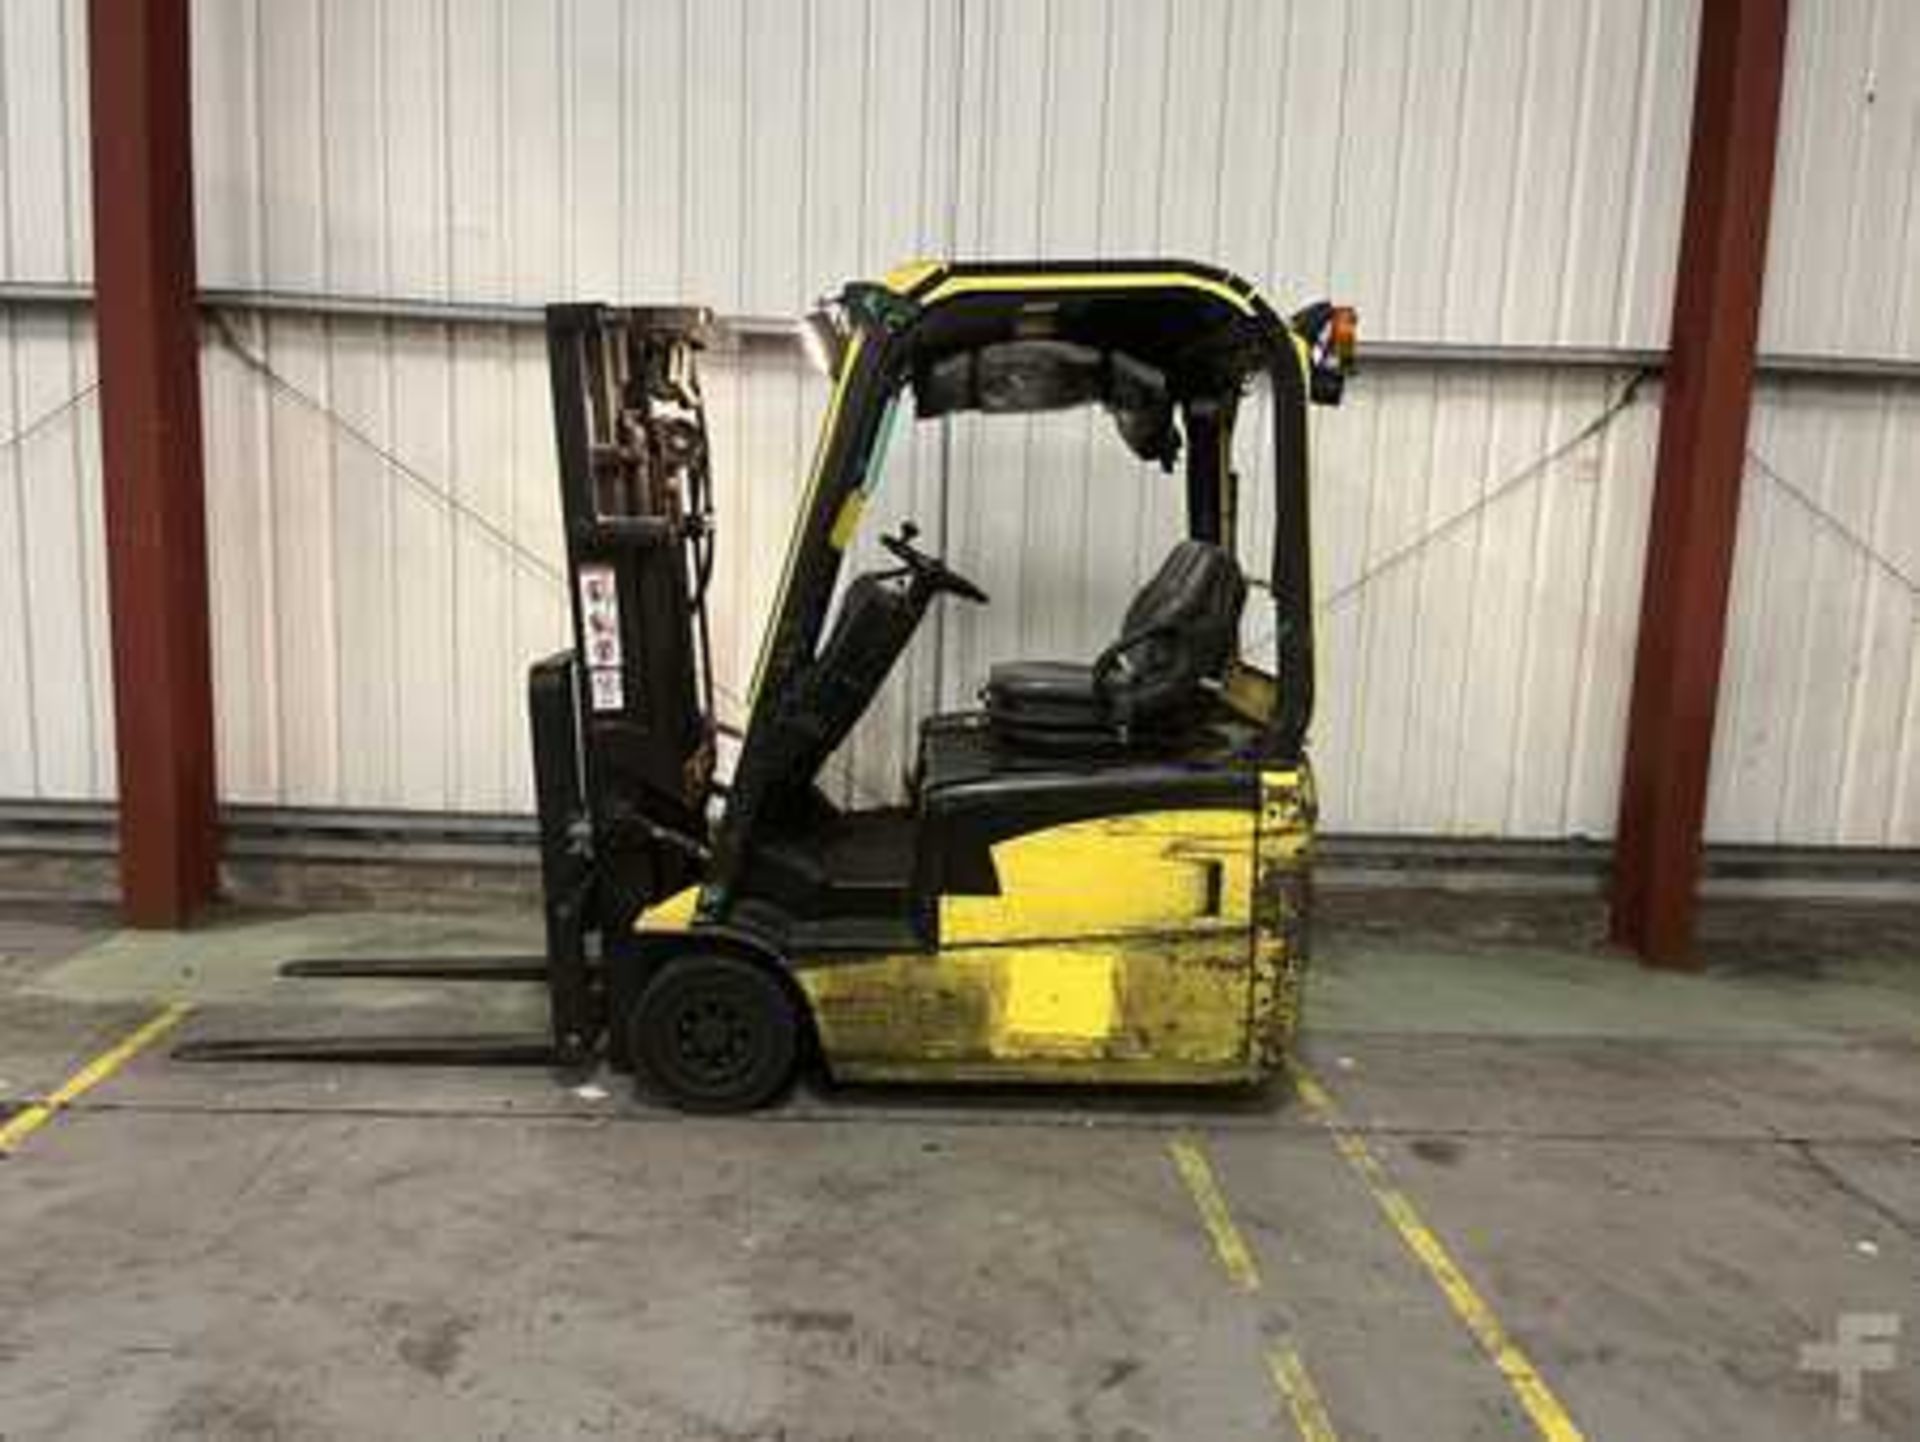 >>>SPECIAL CLEARANCE<<< ELECTRIC - 3 WHEELS CAT LIFT TRUCKS FB16NT *CHARGER INCLUDED